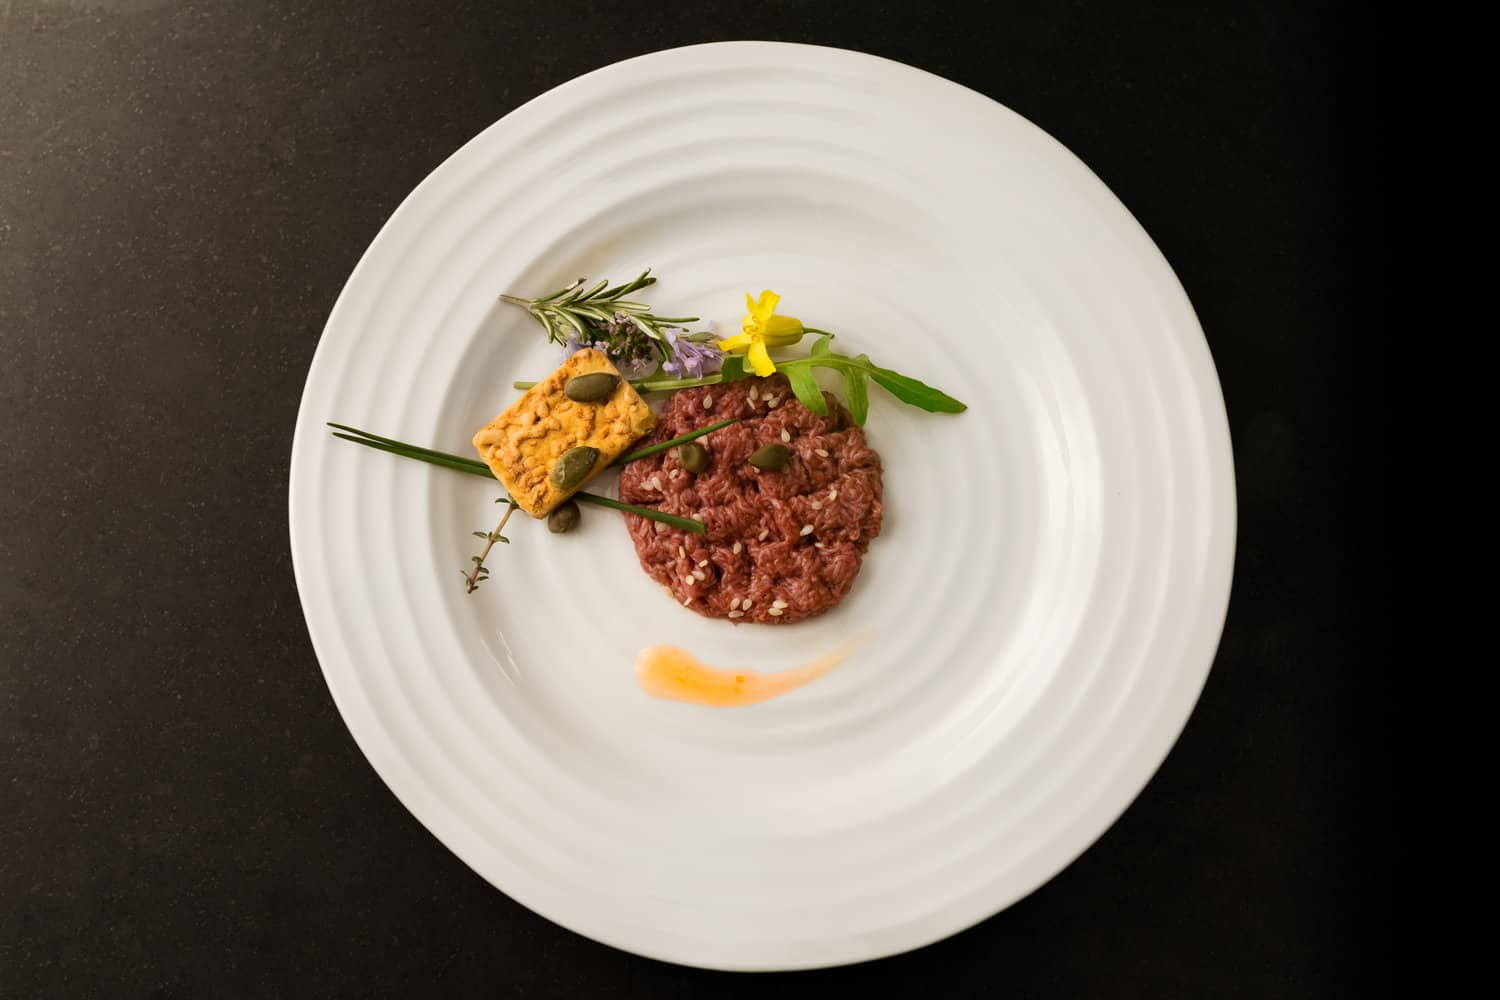 €40 million in new funding for cultured meat pioneer Mosa Meat